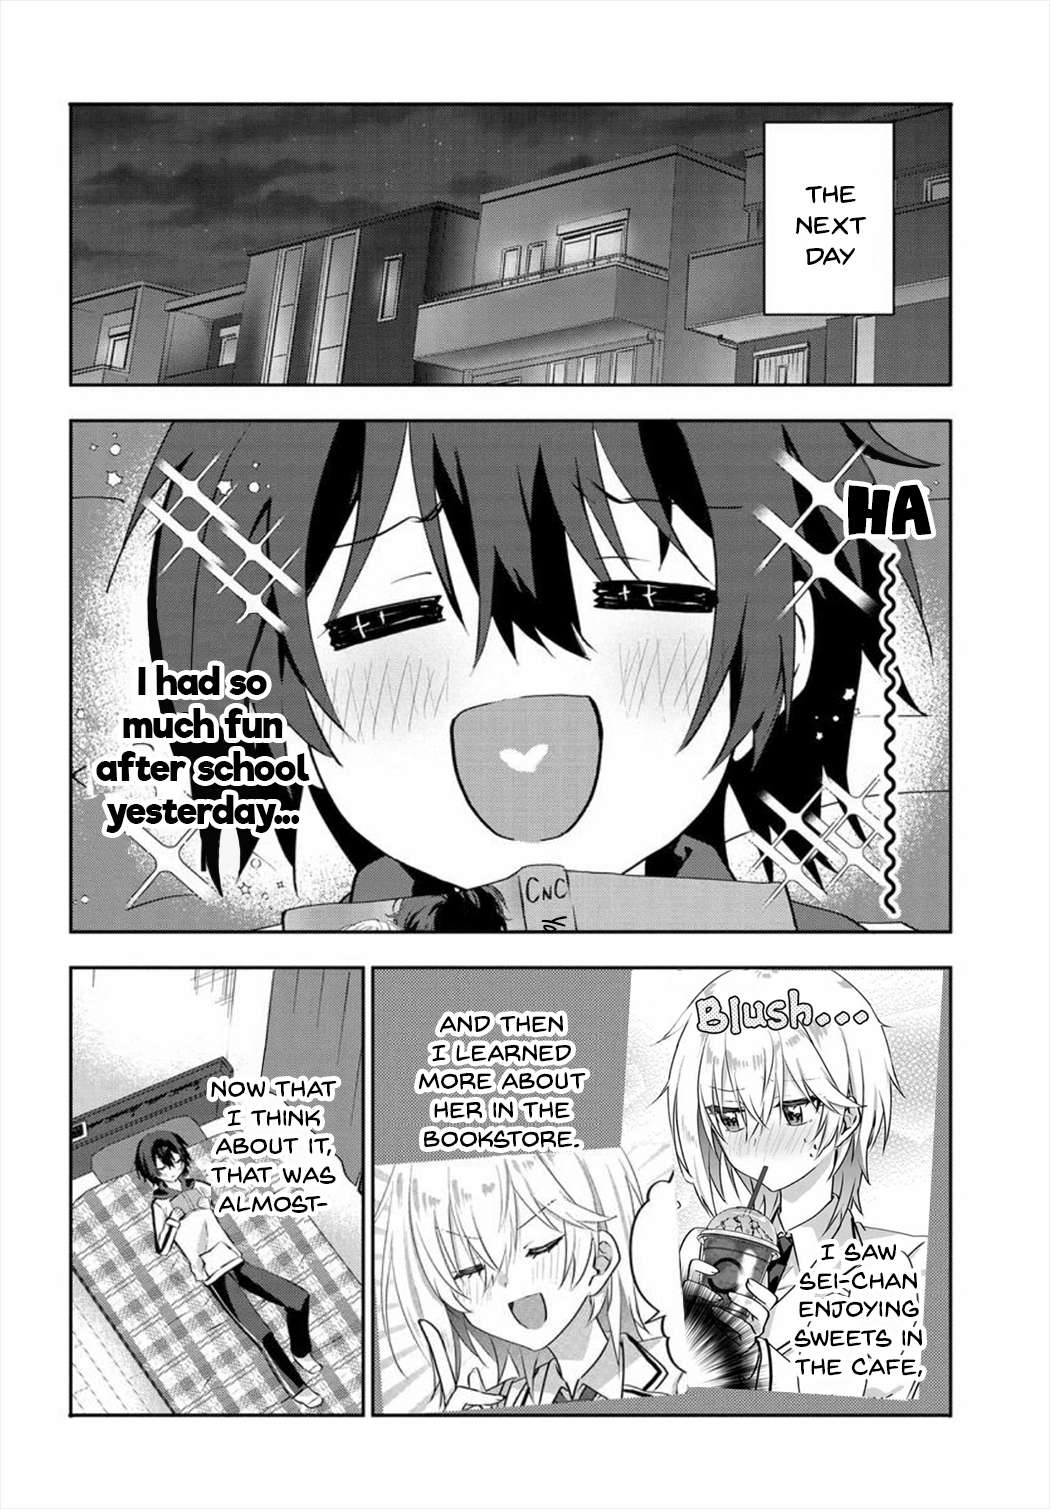 Since I’Ve Entered The World Of Romantic Comedy Manga, I’Ll Do My Best To Make The Losing Heroine Happy - chapter 5.2 - #4